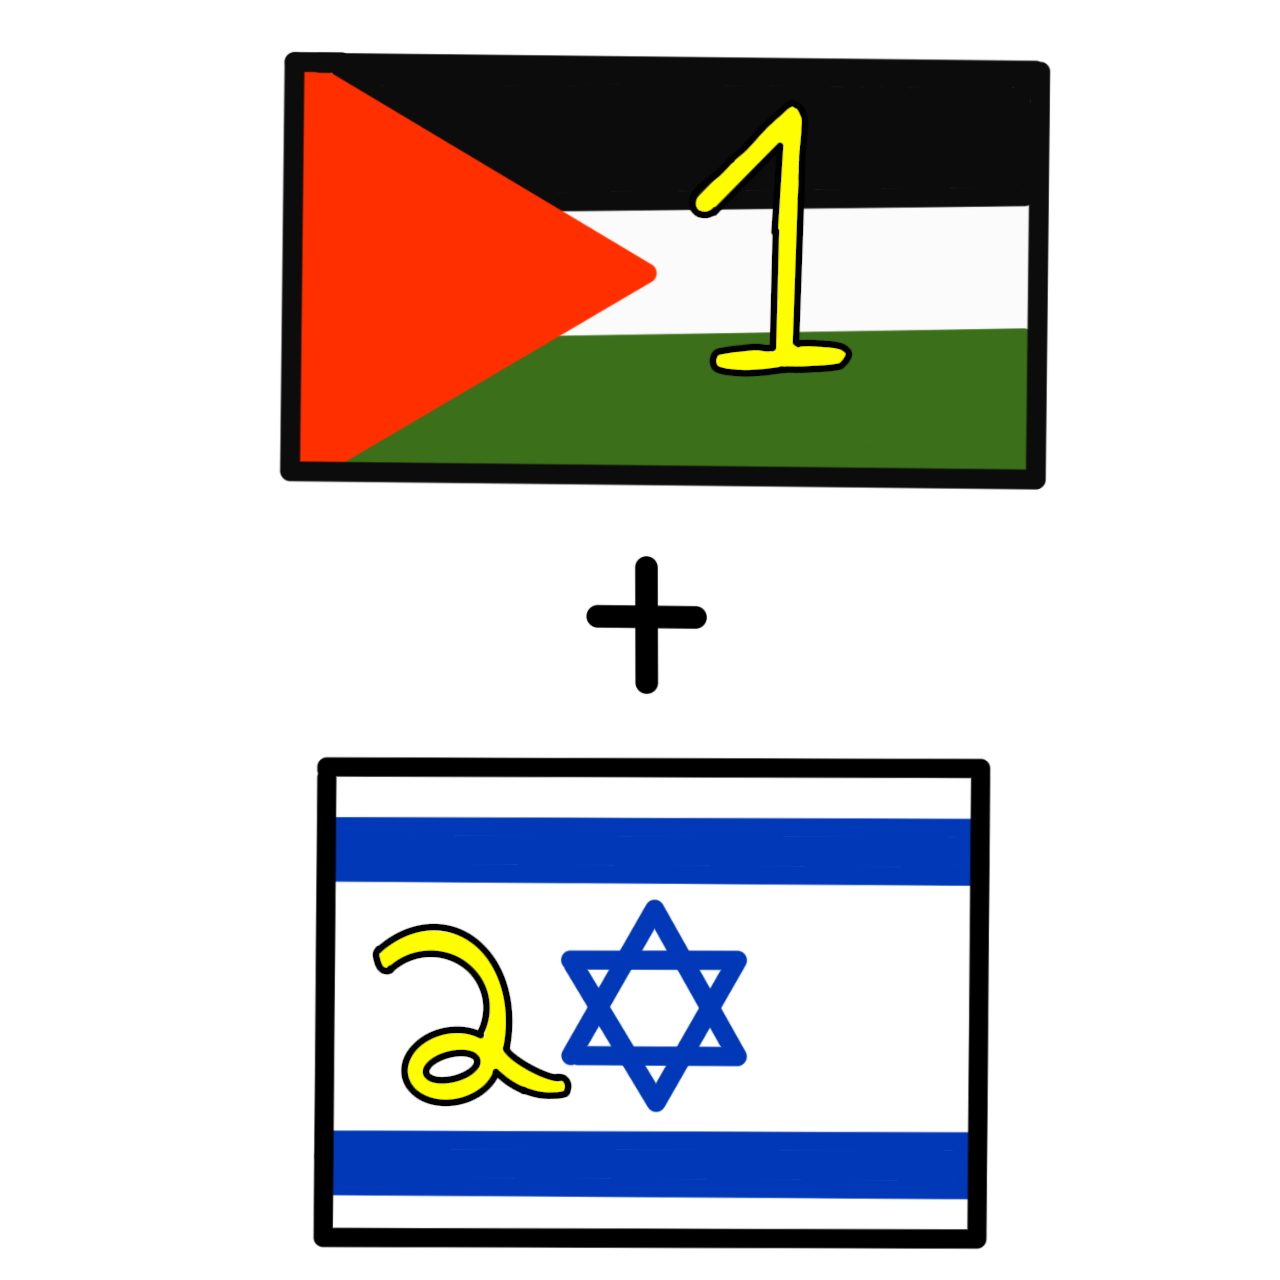  A drawing of the Palestinian flag and the Israeli flag. In between the is a plus sign and each flag has a number on it. The Palestinian flag has a 1 on it and the Israeli flag has a 2 on it.